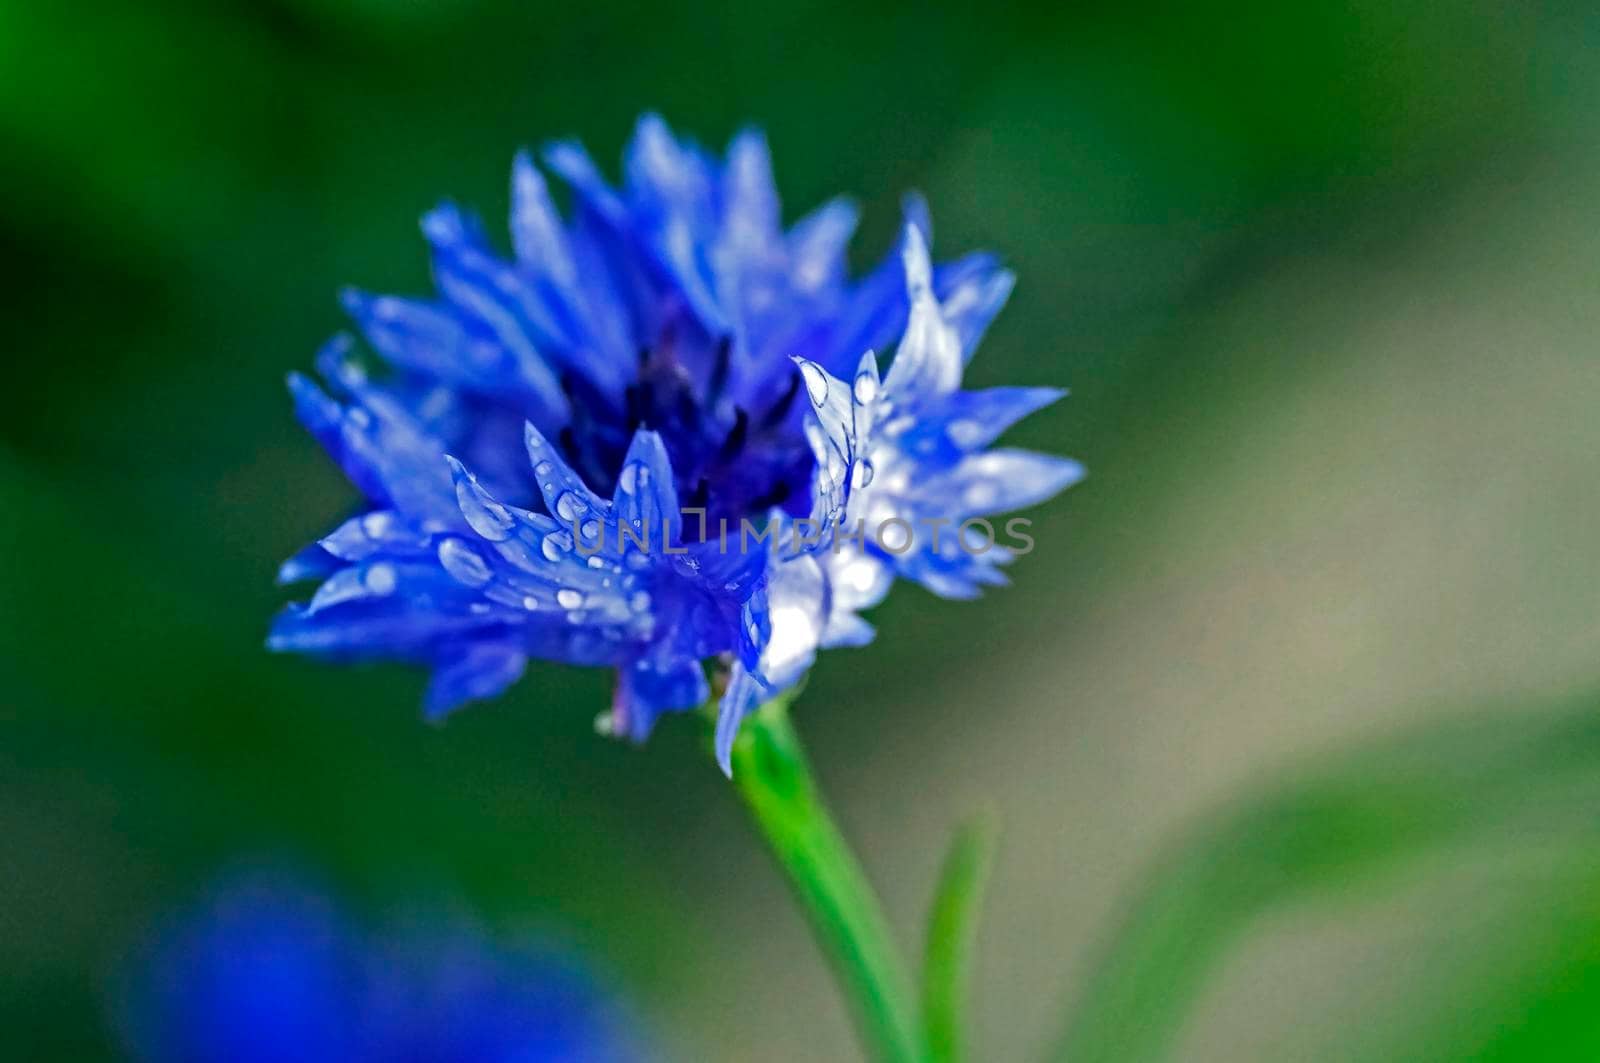 cornflower with raindrops on the petals, soft focus by valerypetr